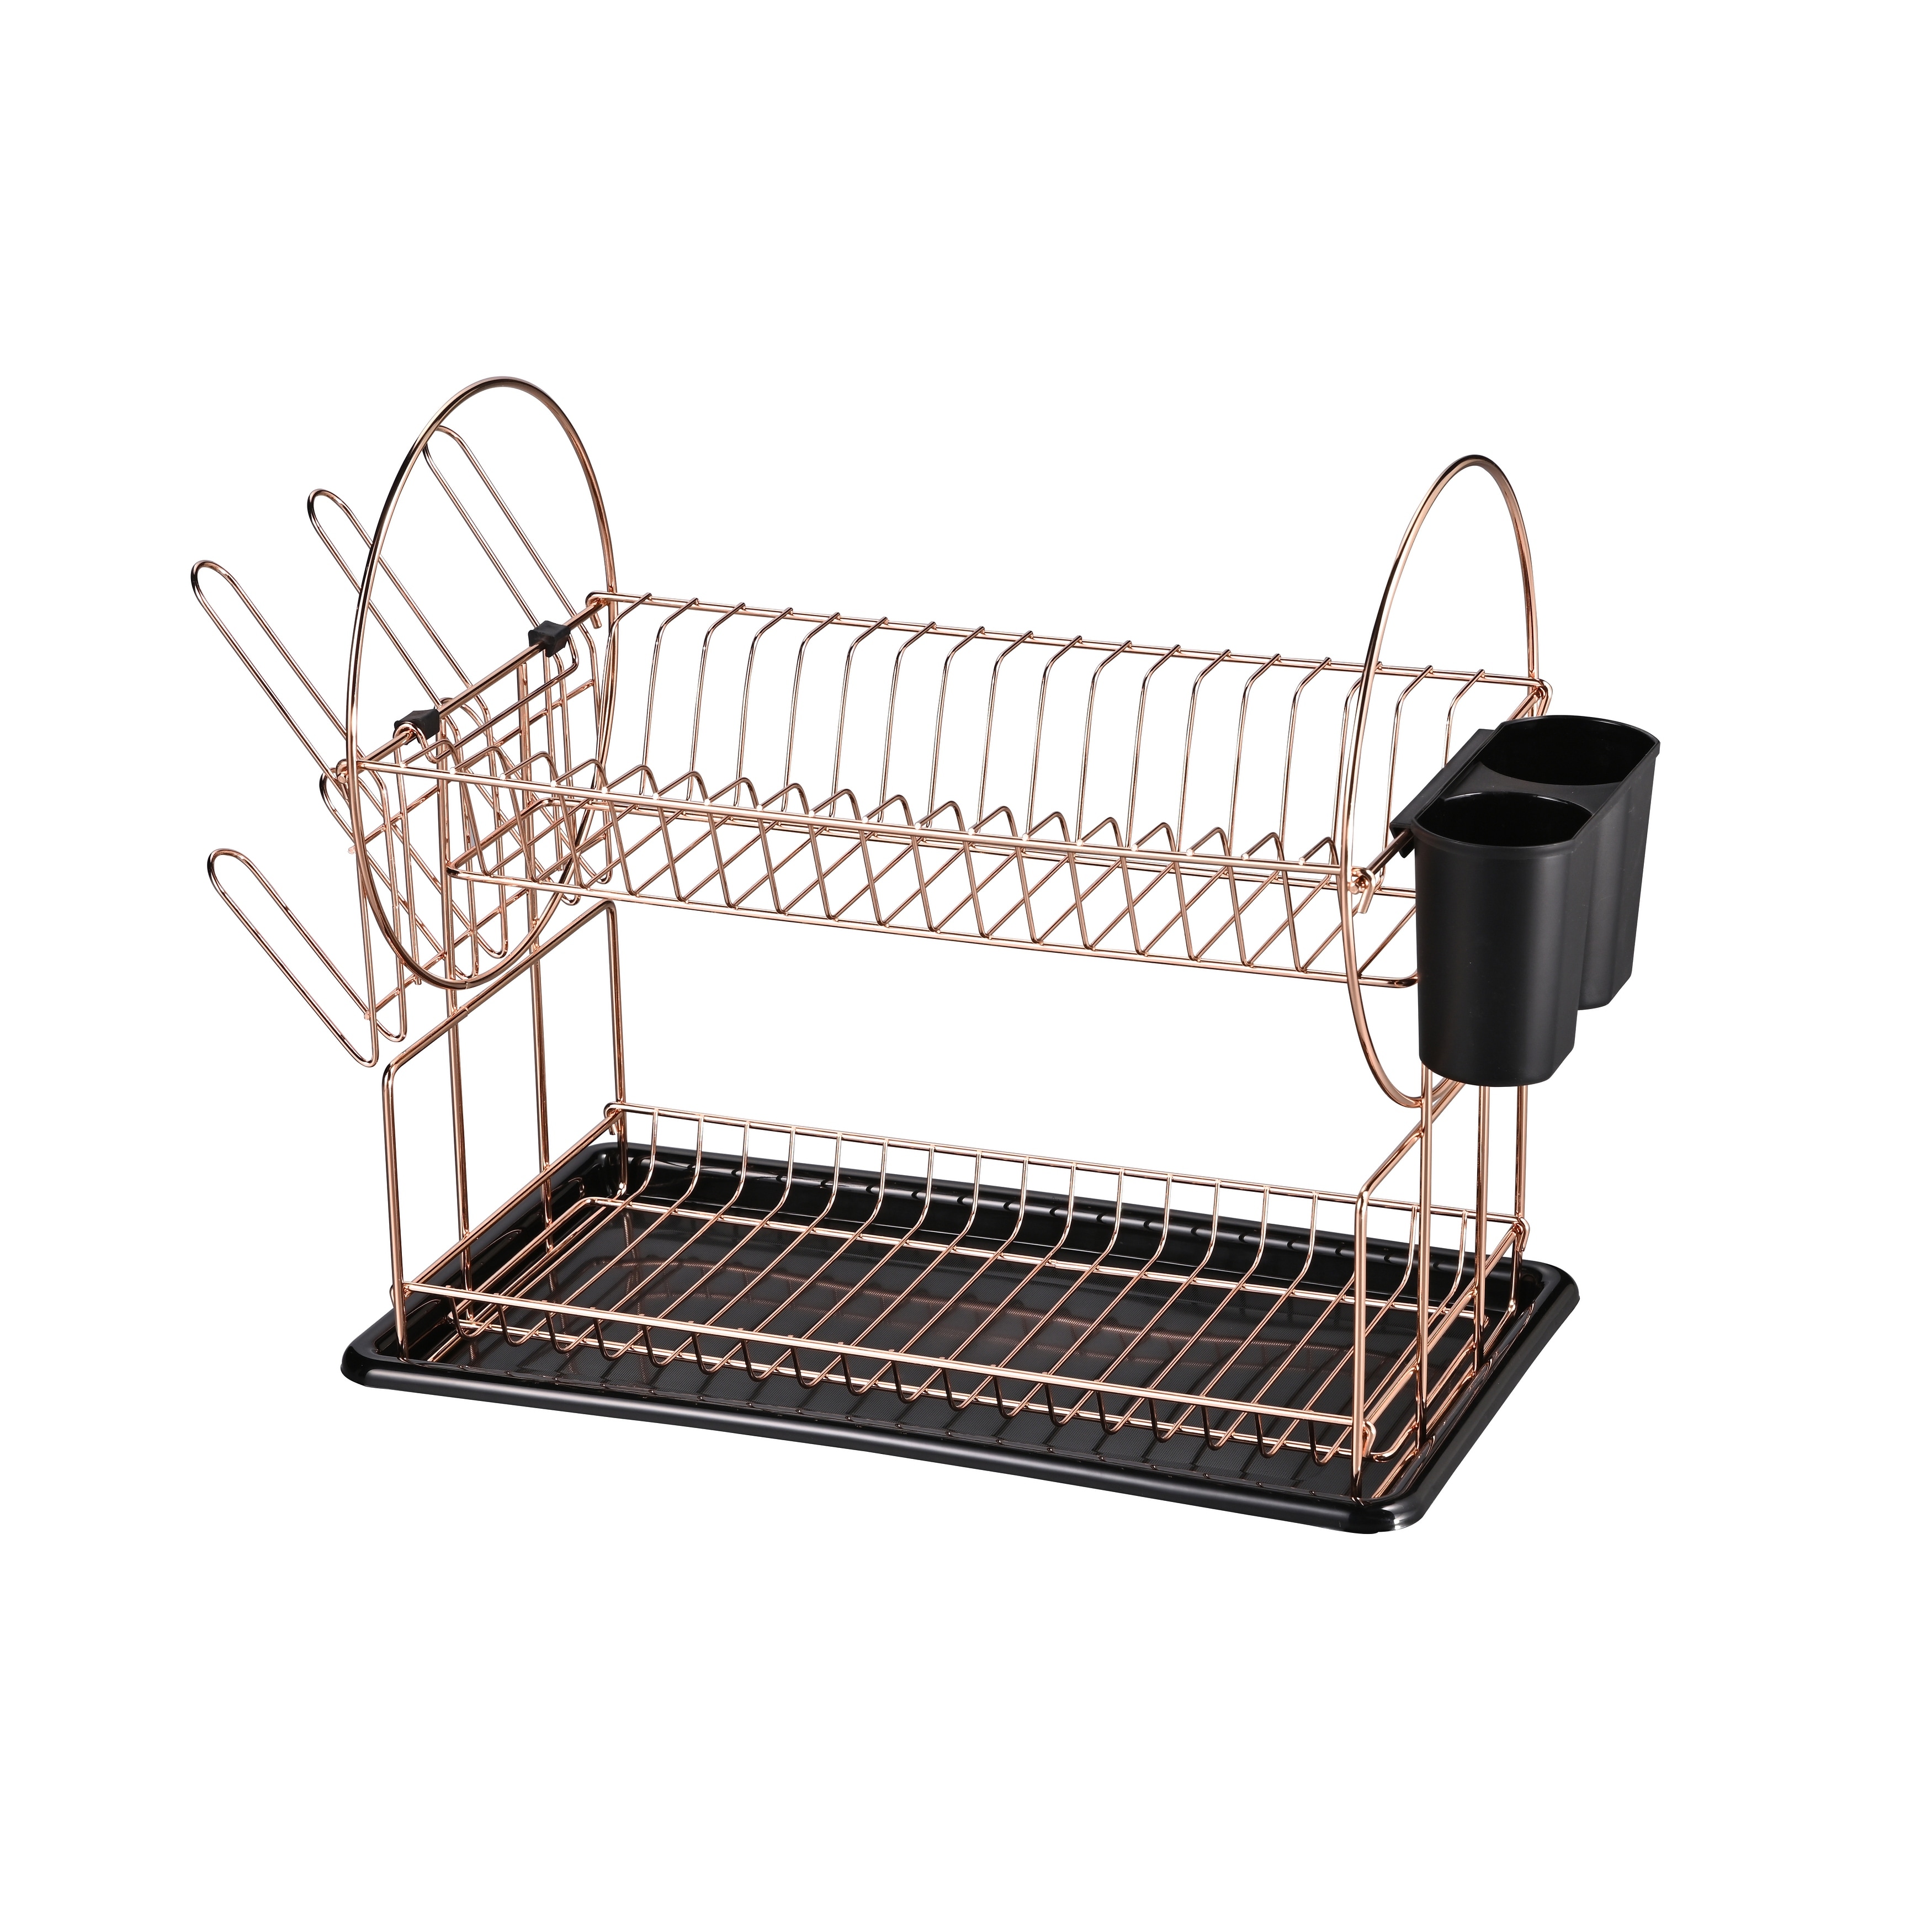 Jiallo Stainless Steel 2-Tier dish rack with dripping tray (Rose Gold) -  20-3/4x9-1/4x14-1/8 - Bed Bath & Beyond - 36965832